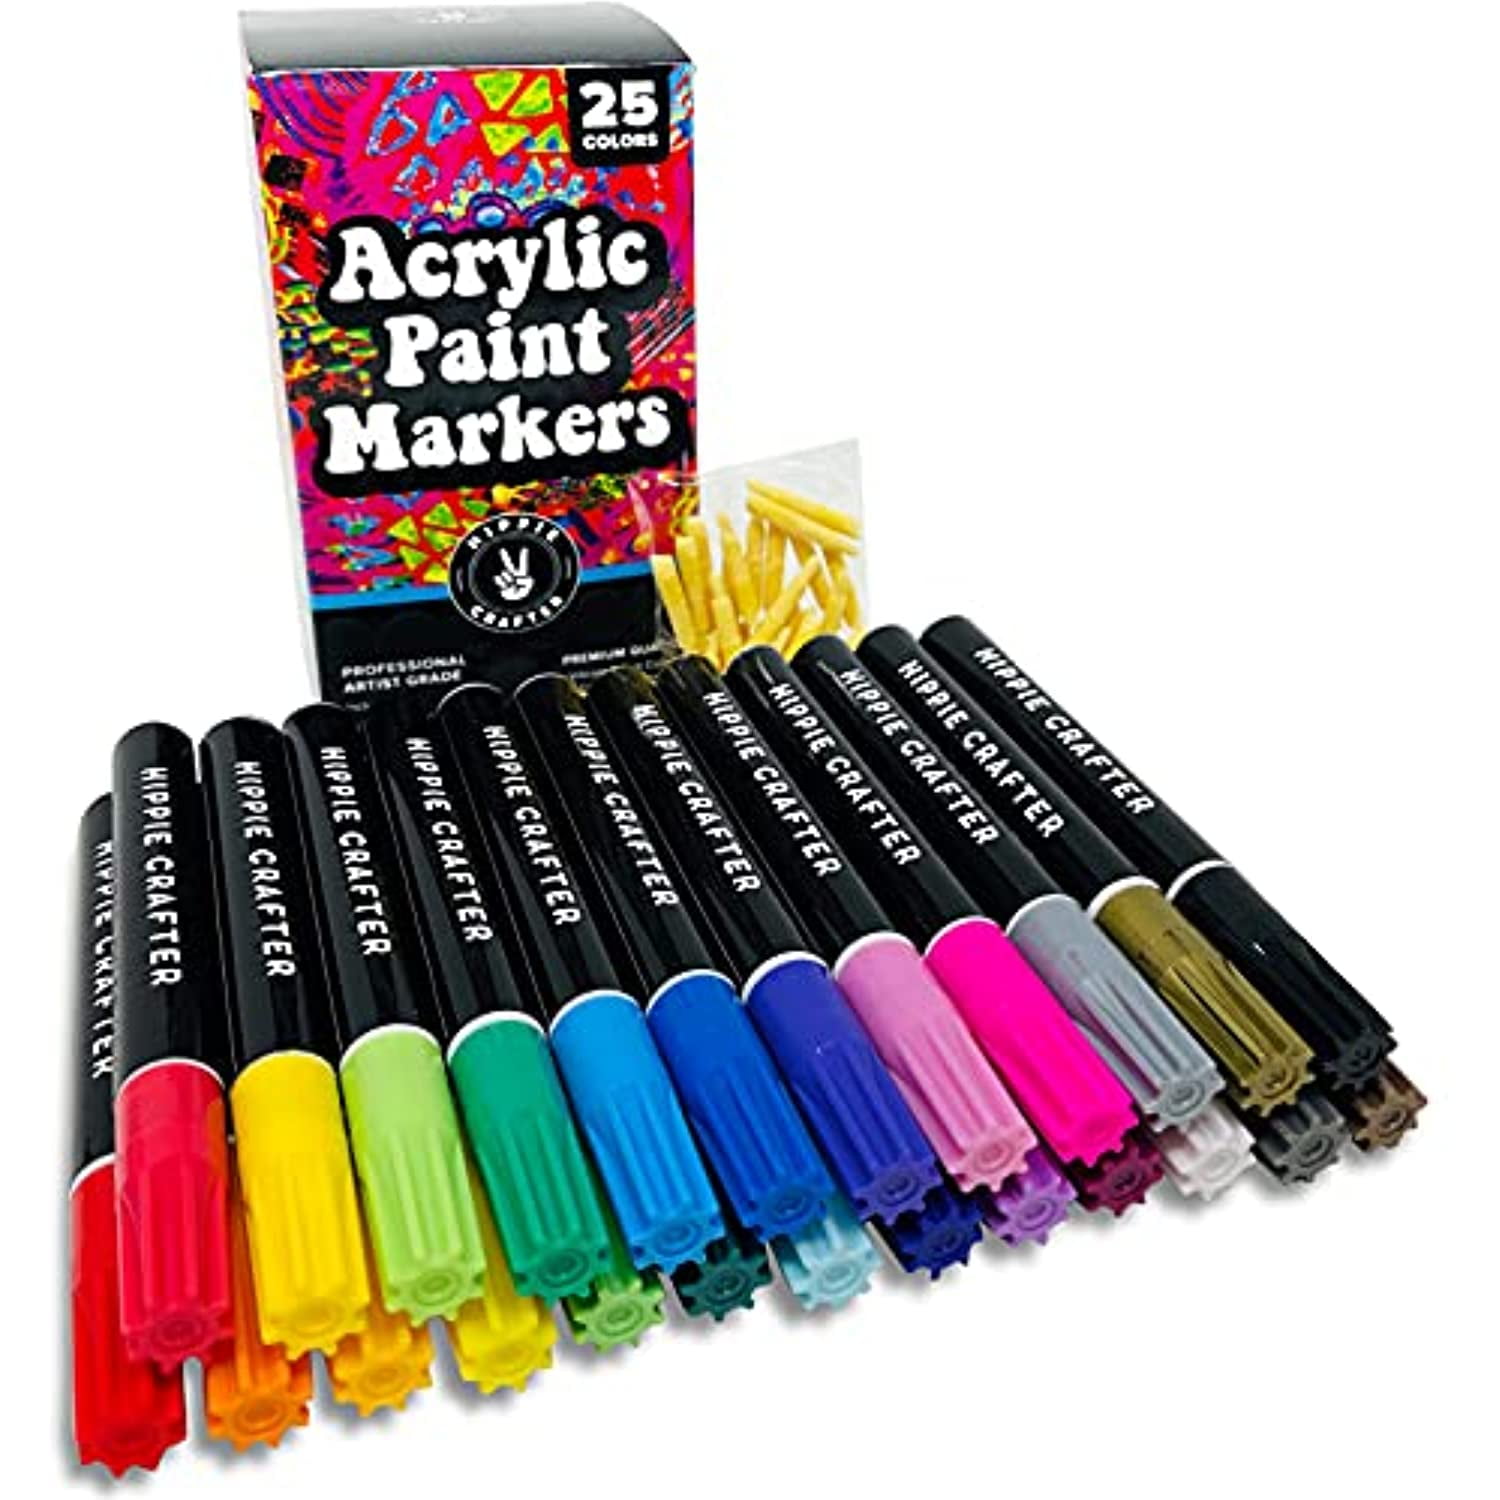 36 Acrylic Paint Pens Skin and Earth Tones (Pro Color Series Marker Set)  Medium